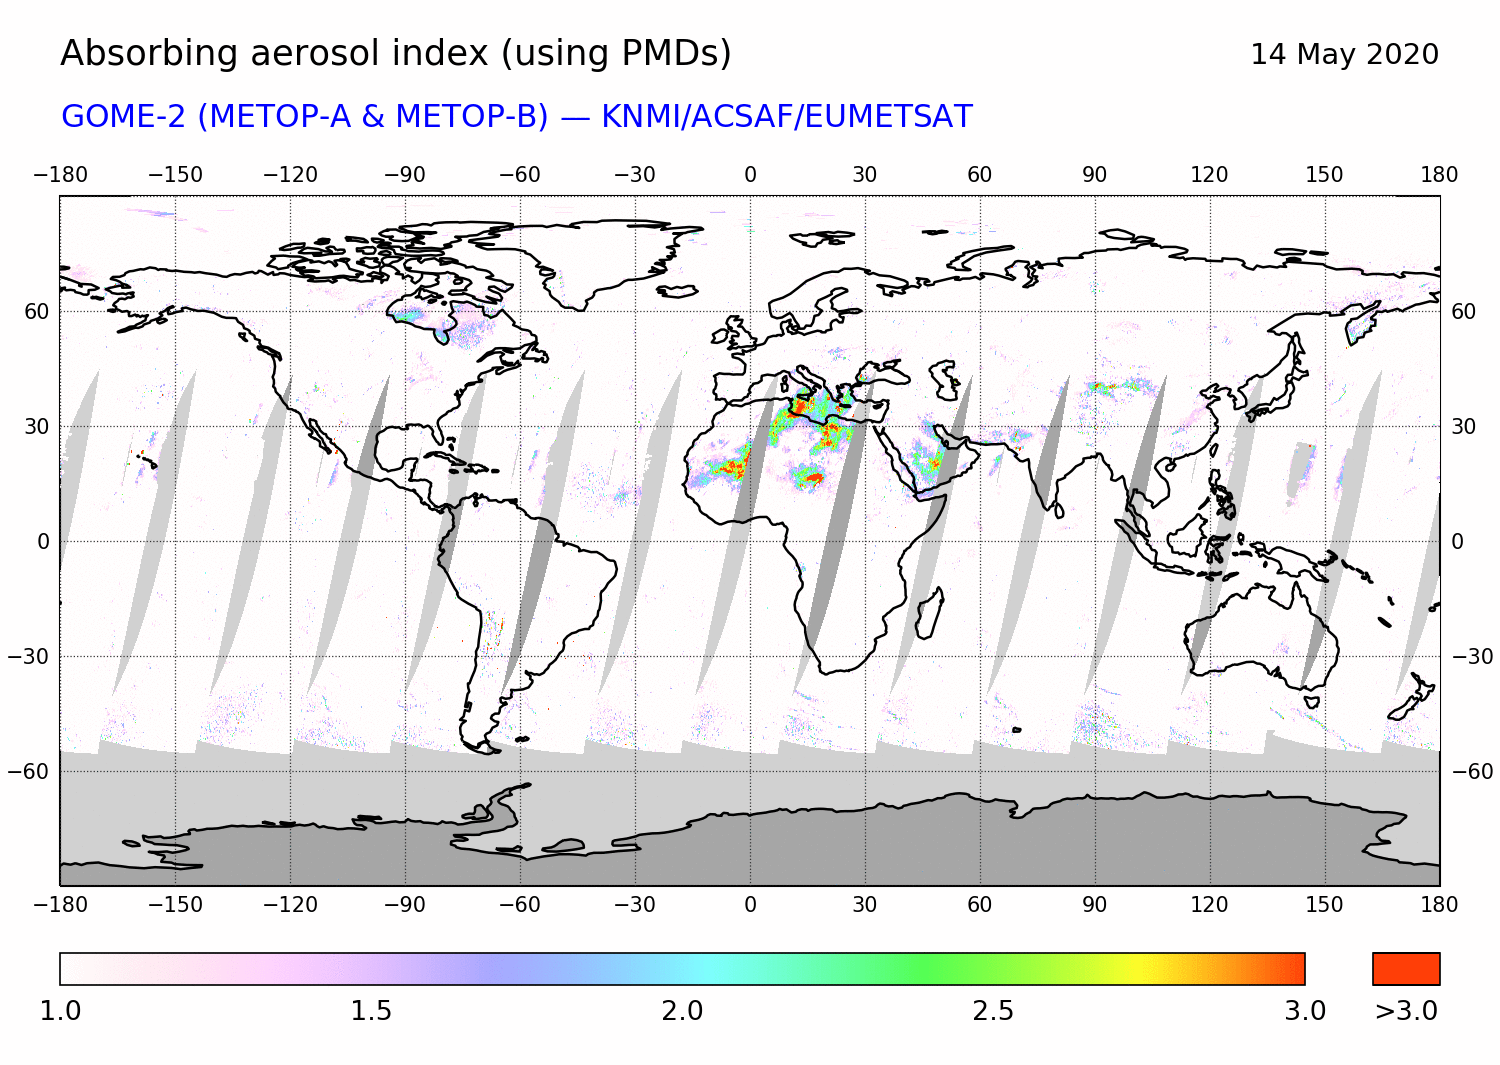 GOME-2 - Absorbing aerosol index of 14 May 2020